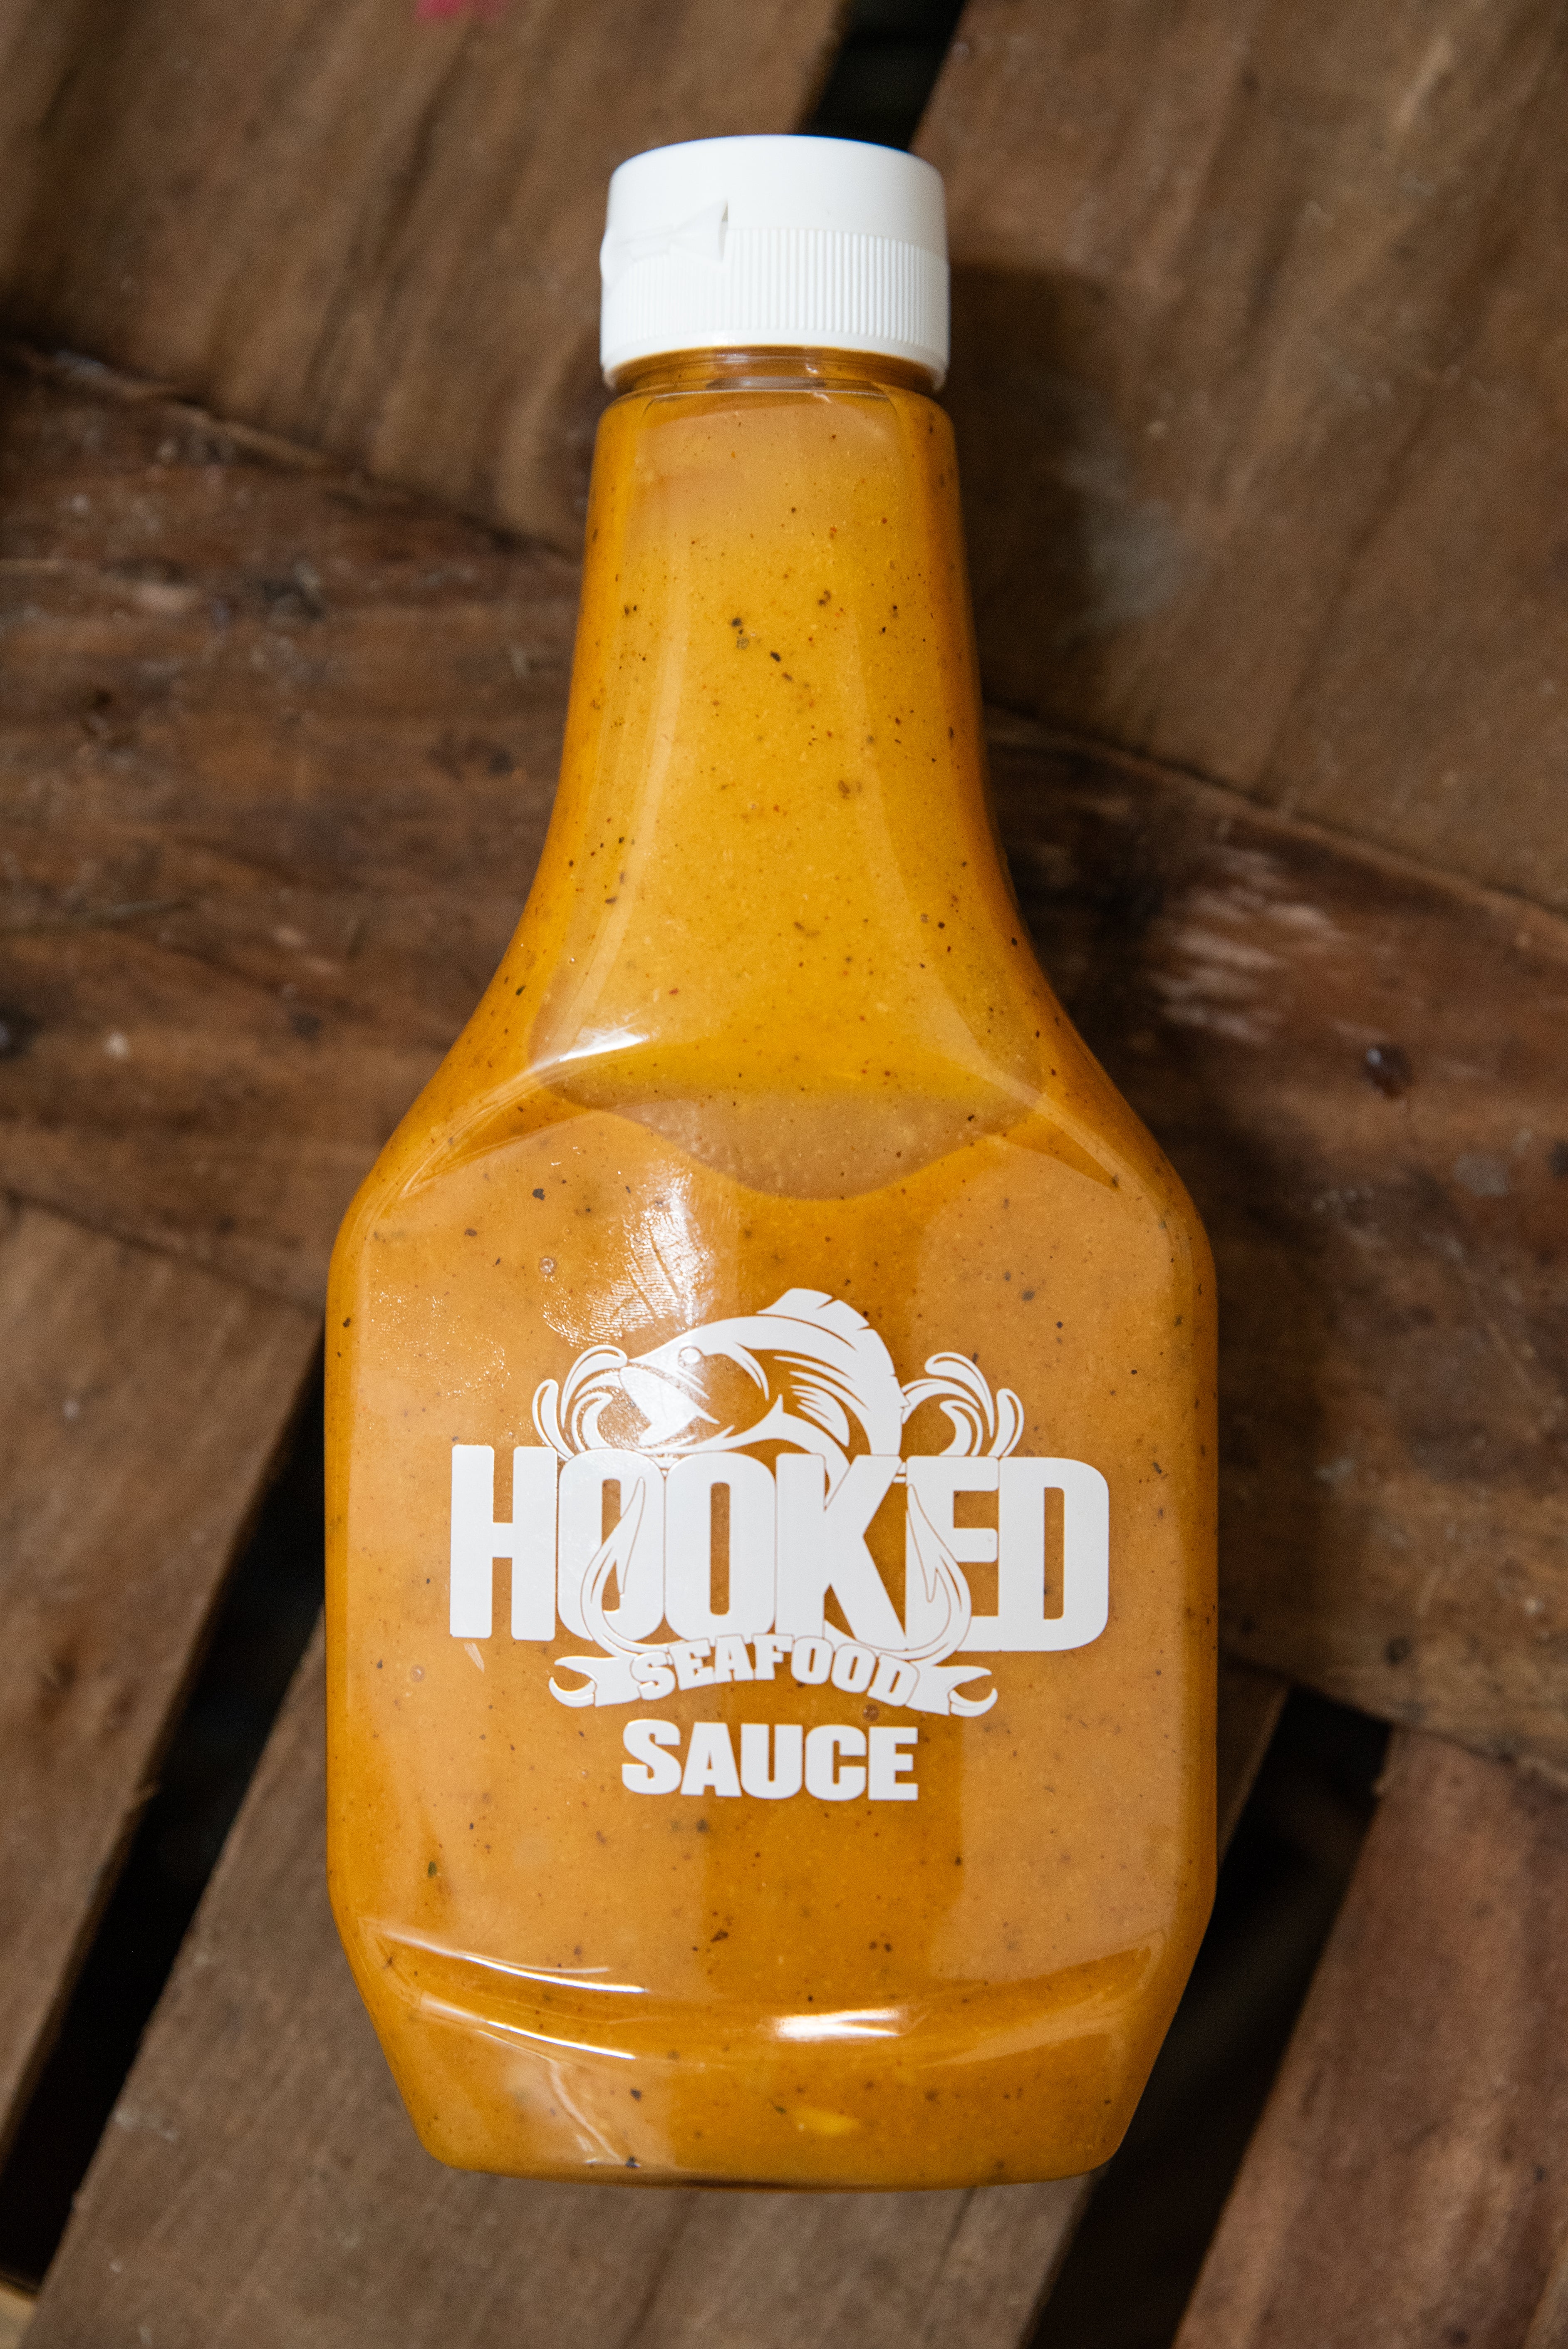 Hooked Sauce